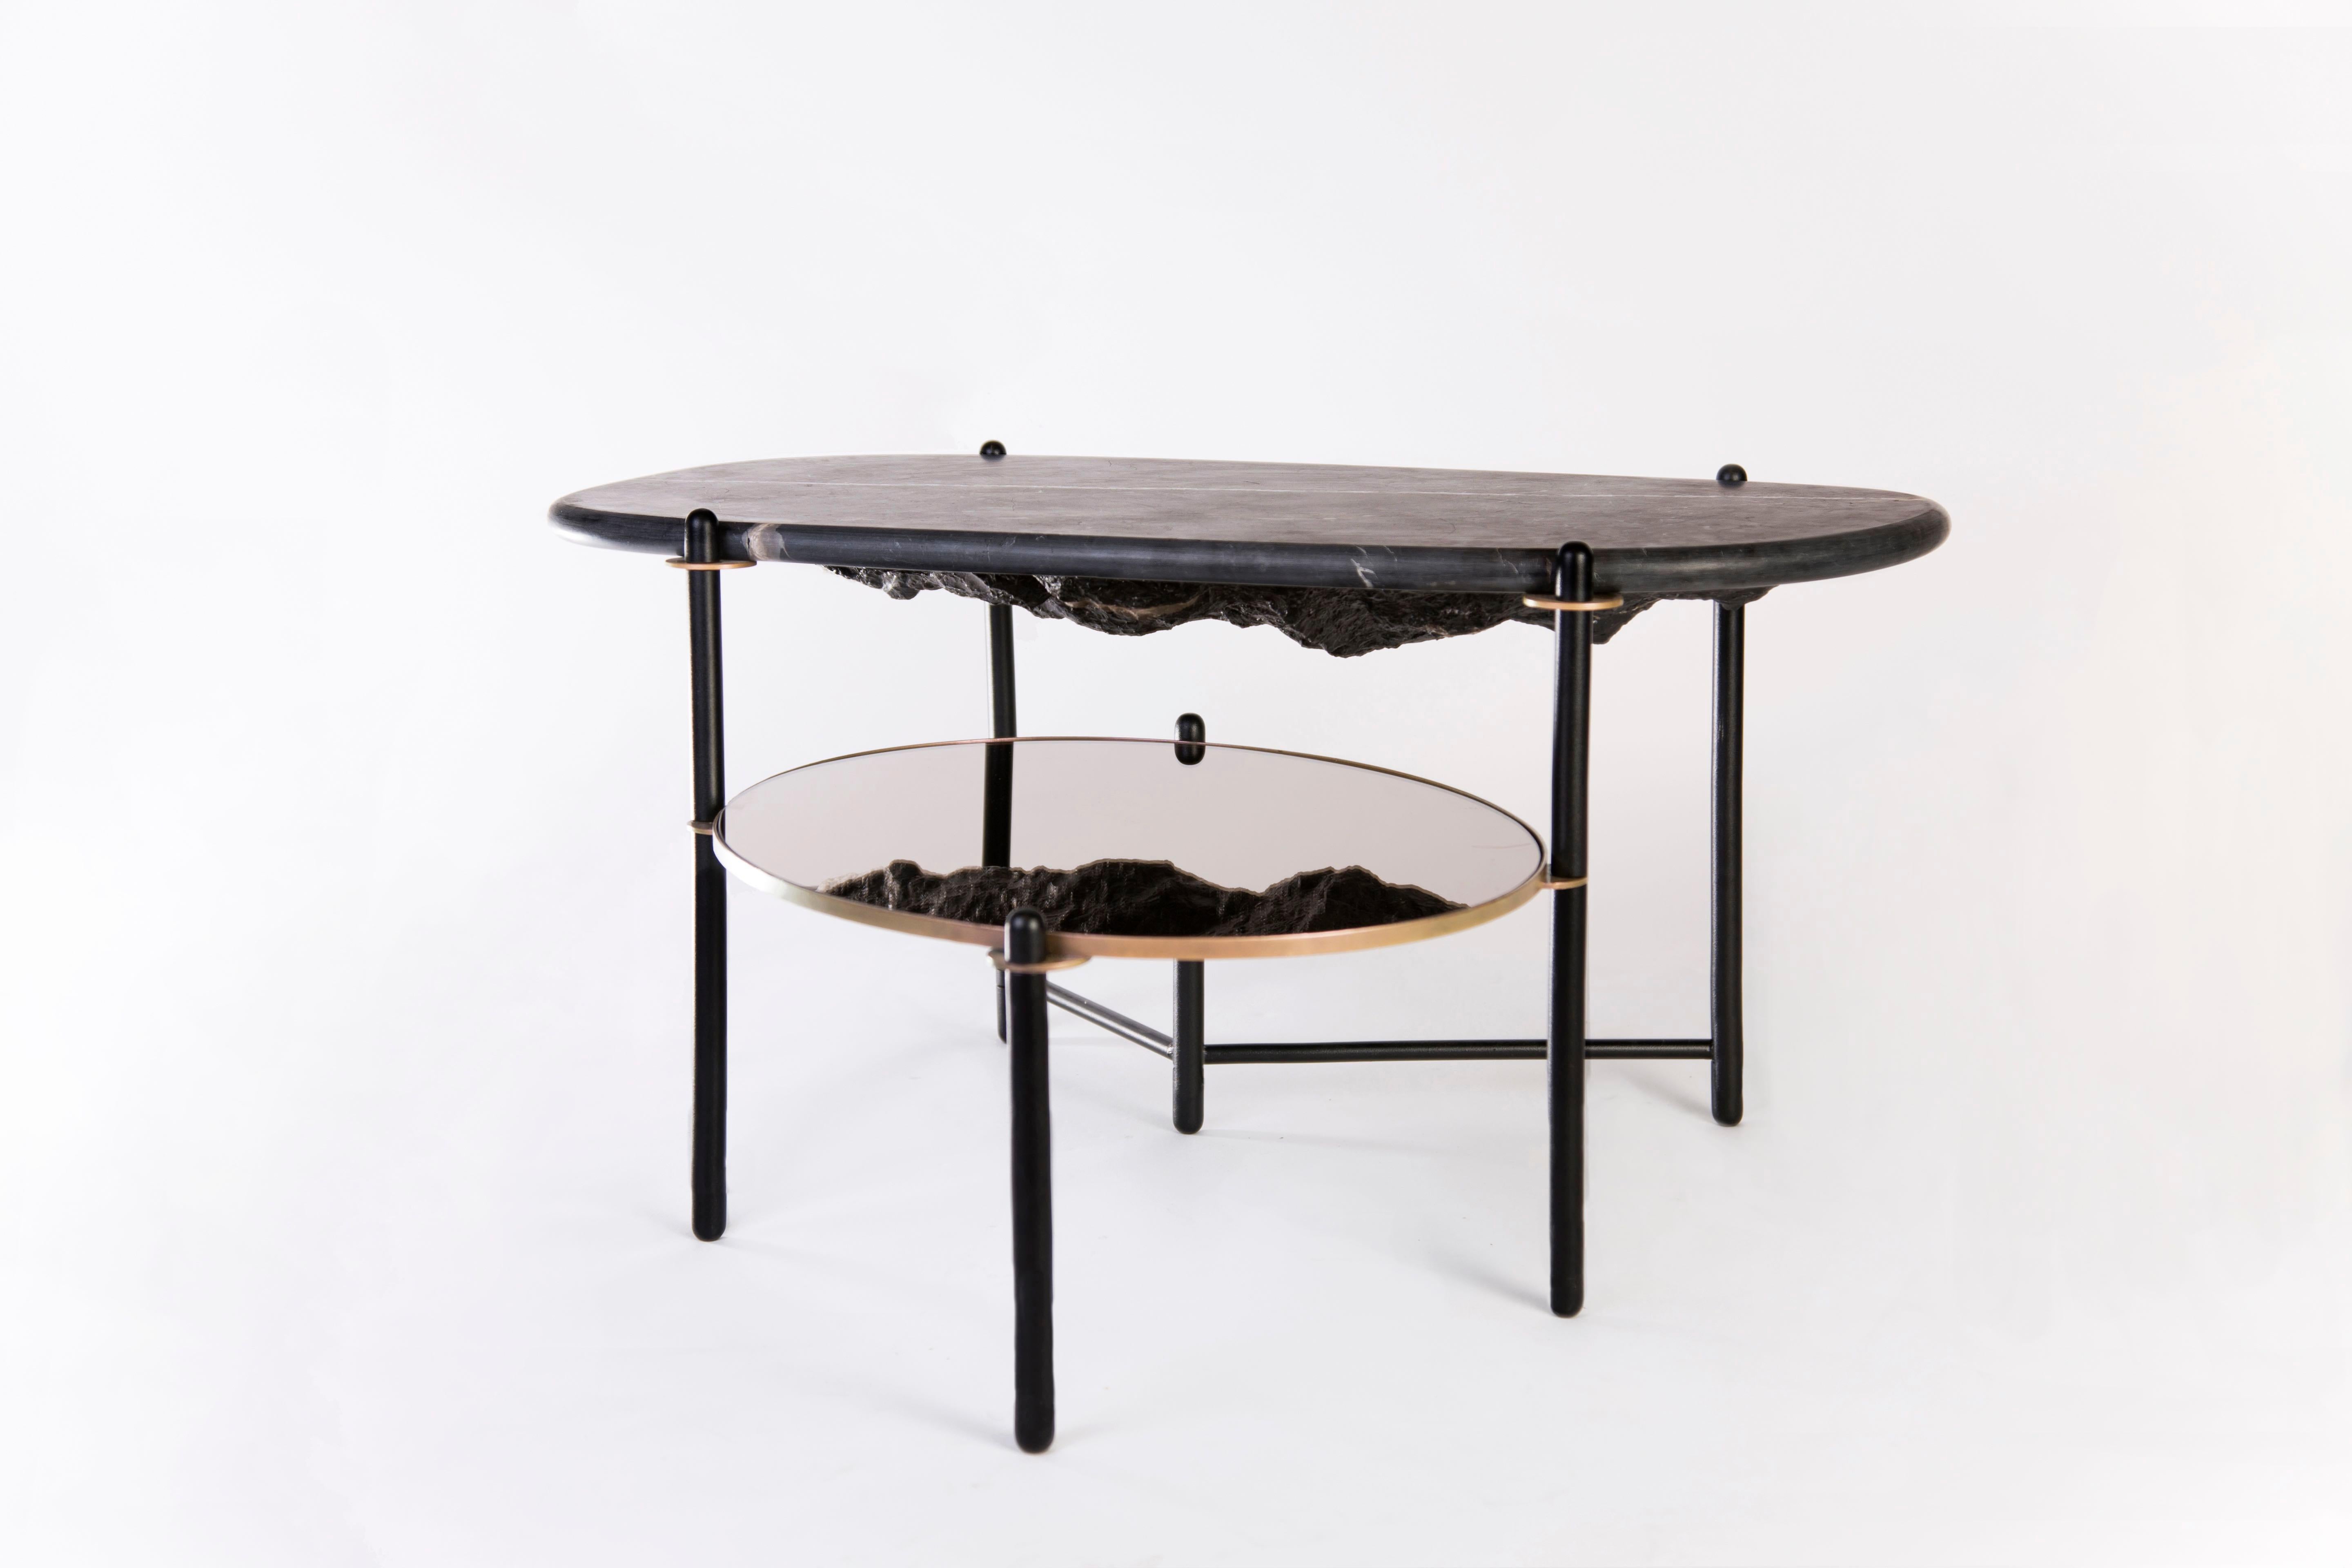 Mountain coffee table by Comité de Proyectos
Dimensions: large: 120 x 100 x H 46 cm 
 small: 80 × 68.5 × H 40 cm
Materials: Polished marble top, mirror, machined and electro-painted cold roll bars

The table has a polished marble top, and carved on